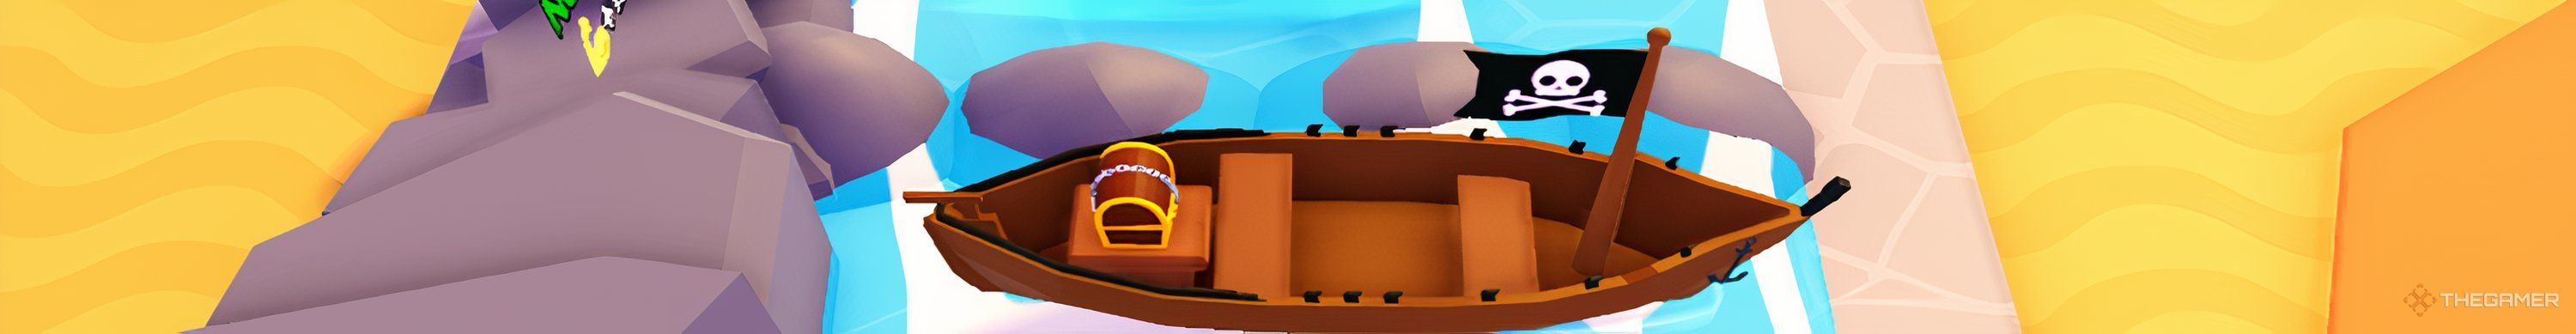 A pirate ship used for training Shark racers in the Roblox game Shark Bite Simulator.